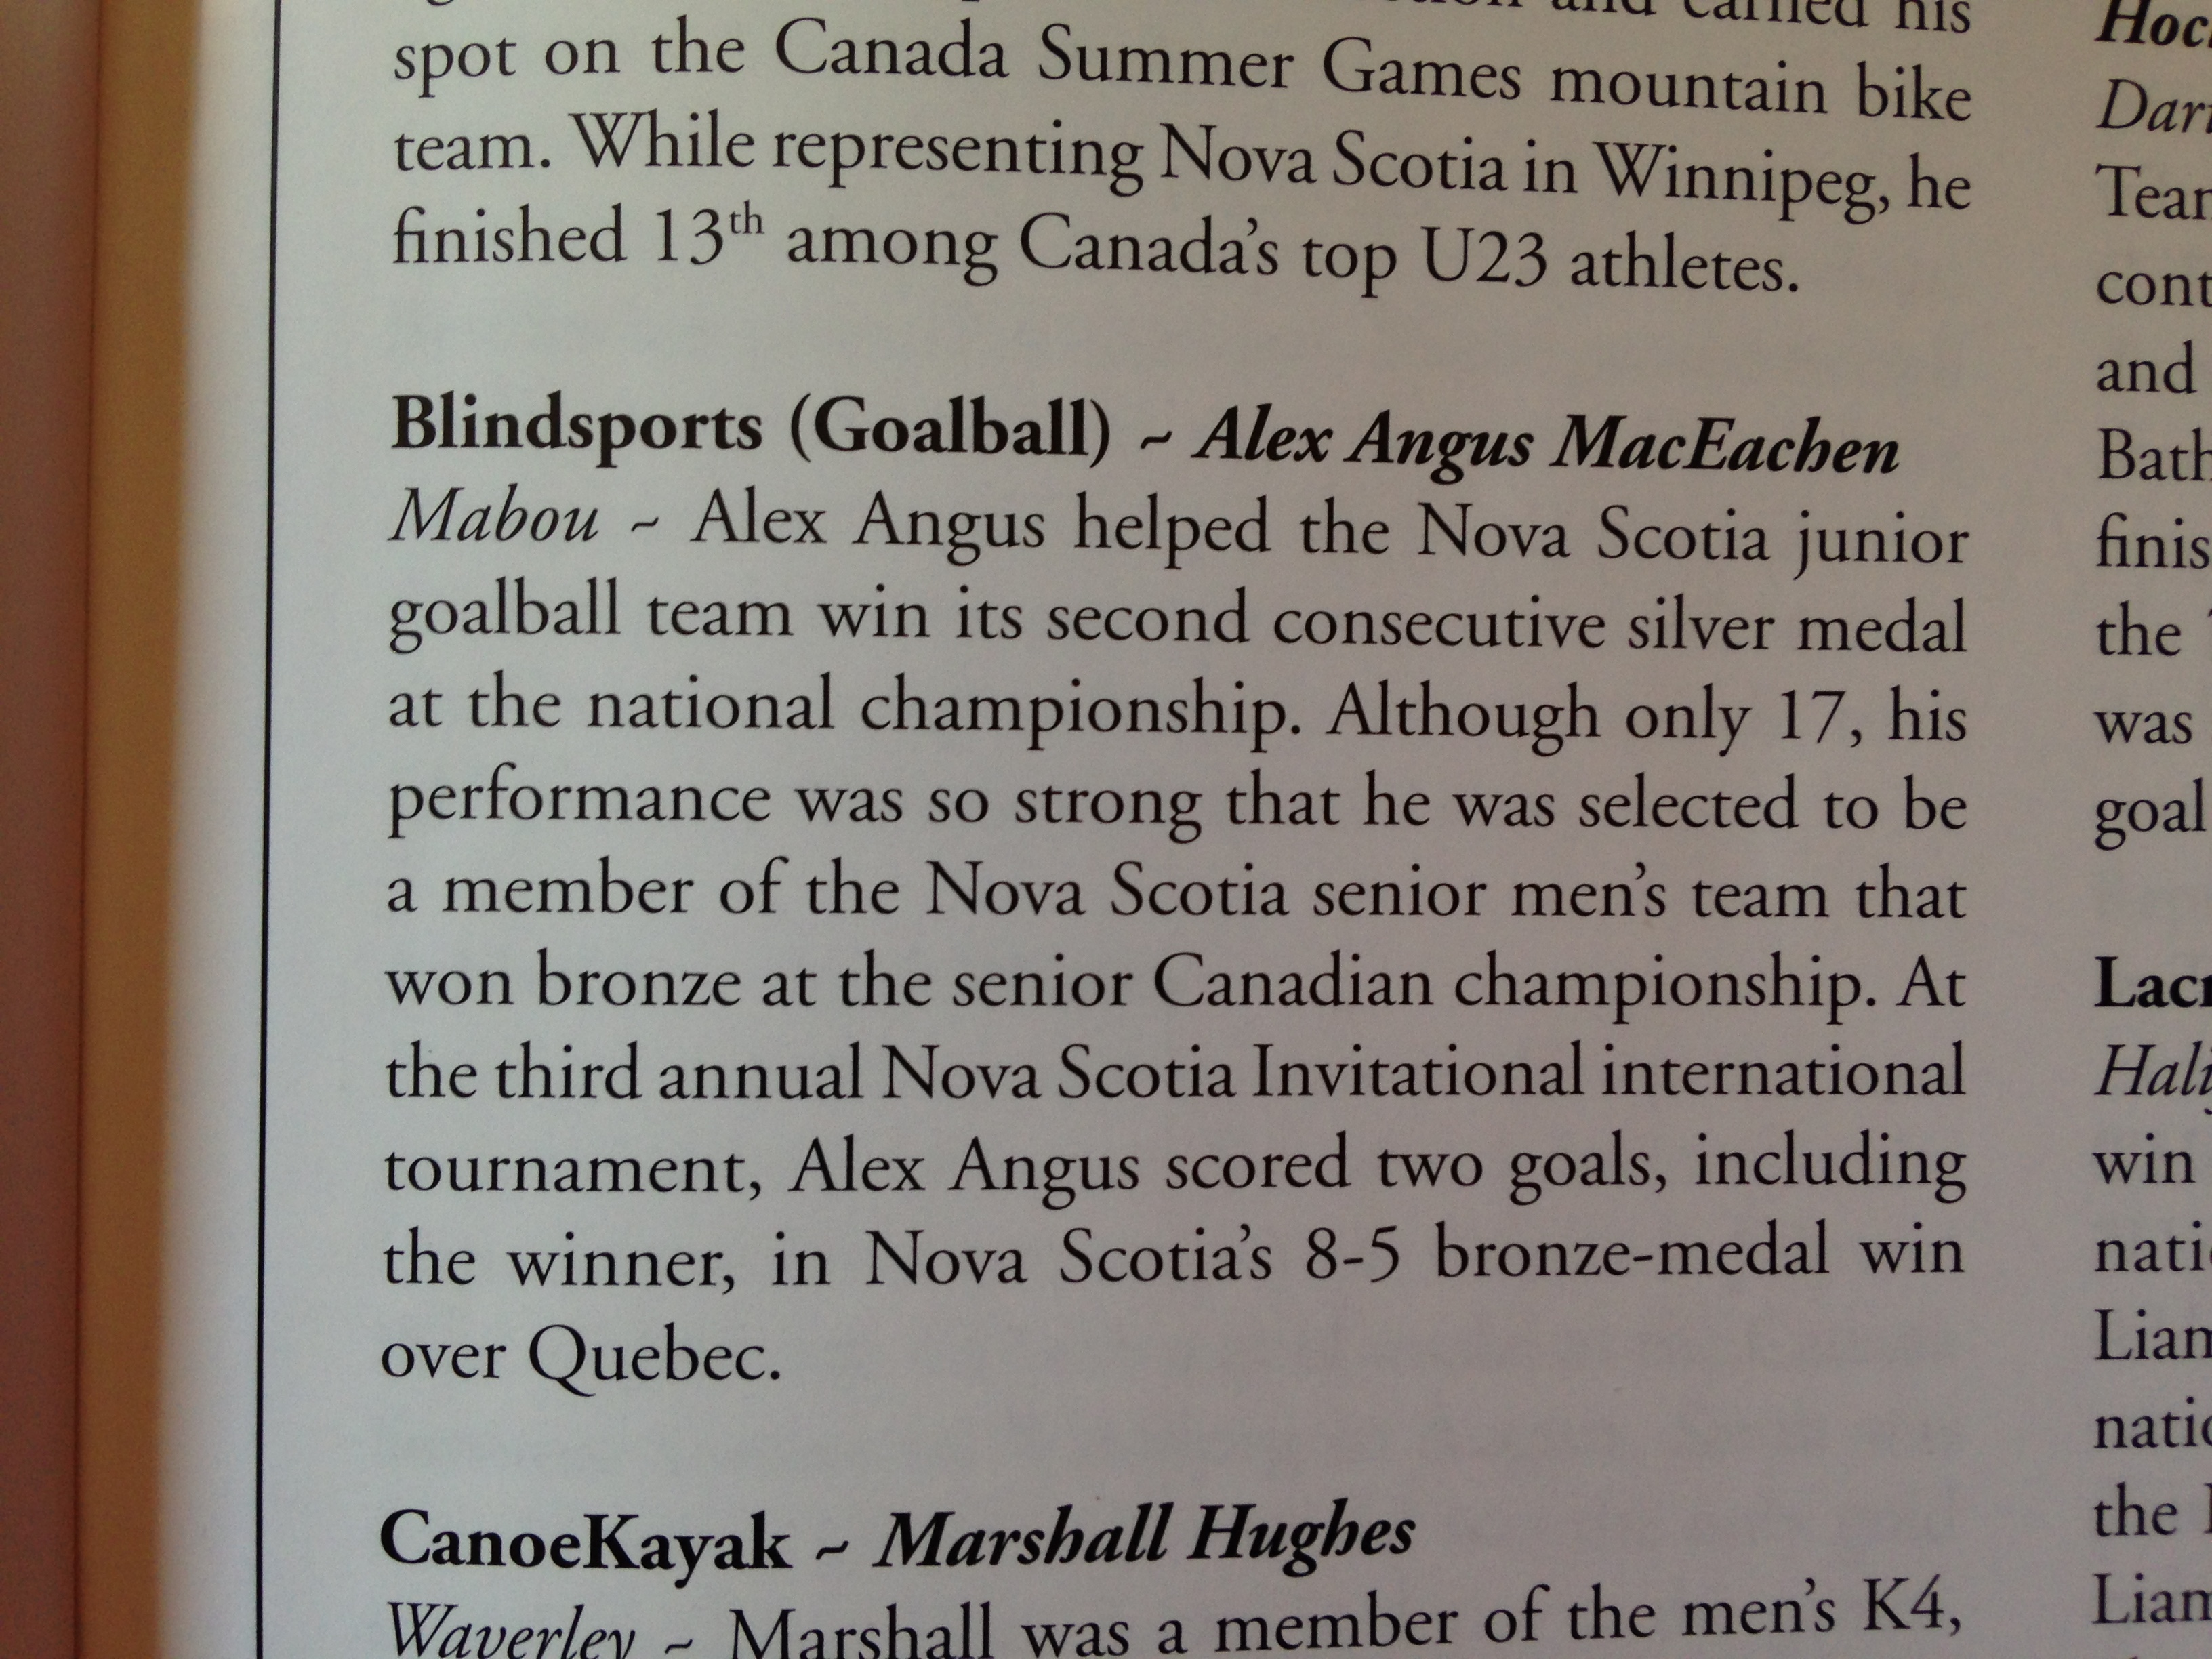 Male Team Athlete of the Year - AlexAngus MacEachen, Mabou Alex Angus helped the Nova Scotia junior goalball team win its second consecutive silver medal at the national championships. Although only 17, his performance was so strong that he was selected to be a member of the Nova Scotia senior men's team that won bronze at the senior Canadian championship. At the third annual Nova Scotia Invitational championship, Alec Angus scored two goals, including the winner in Nova Scotia's 8-5 bronze medal win over Quebec.